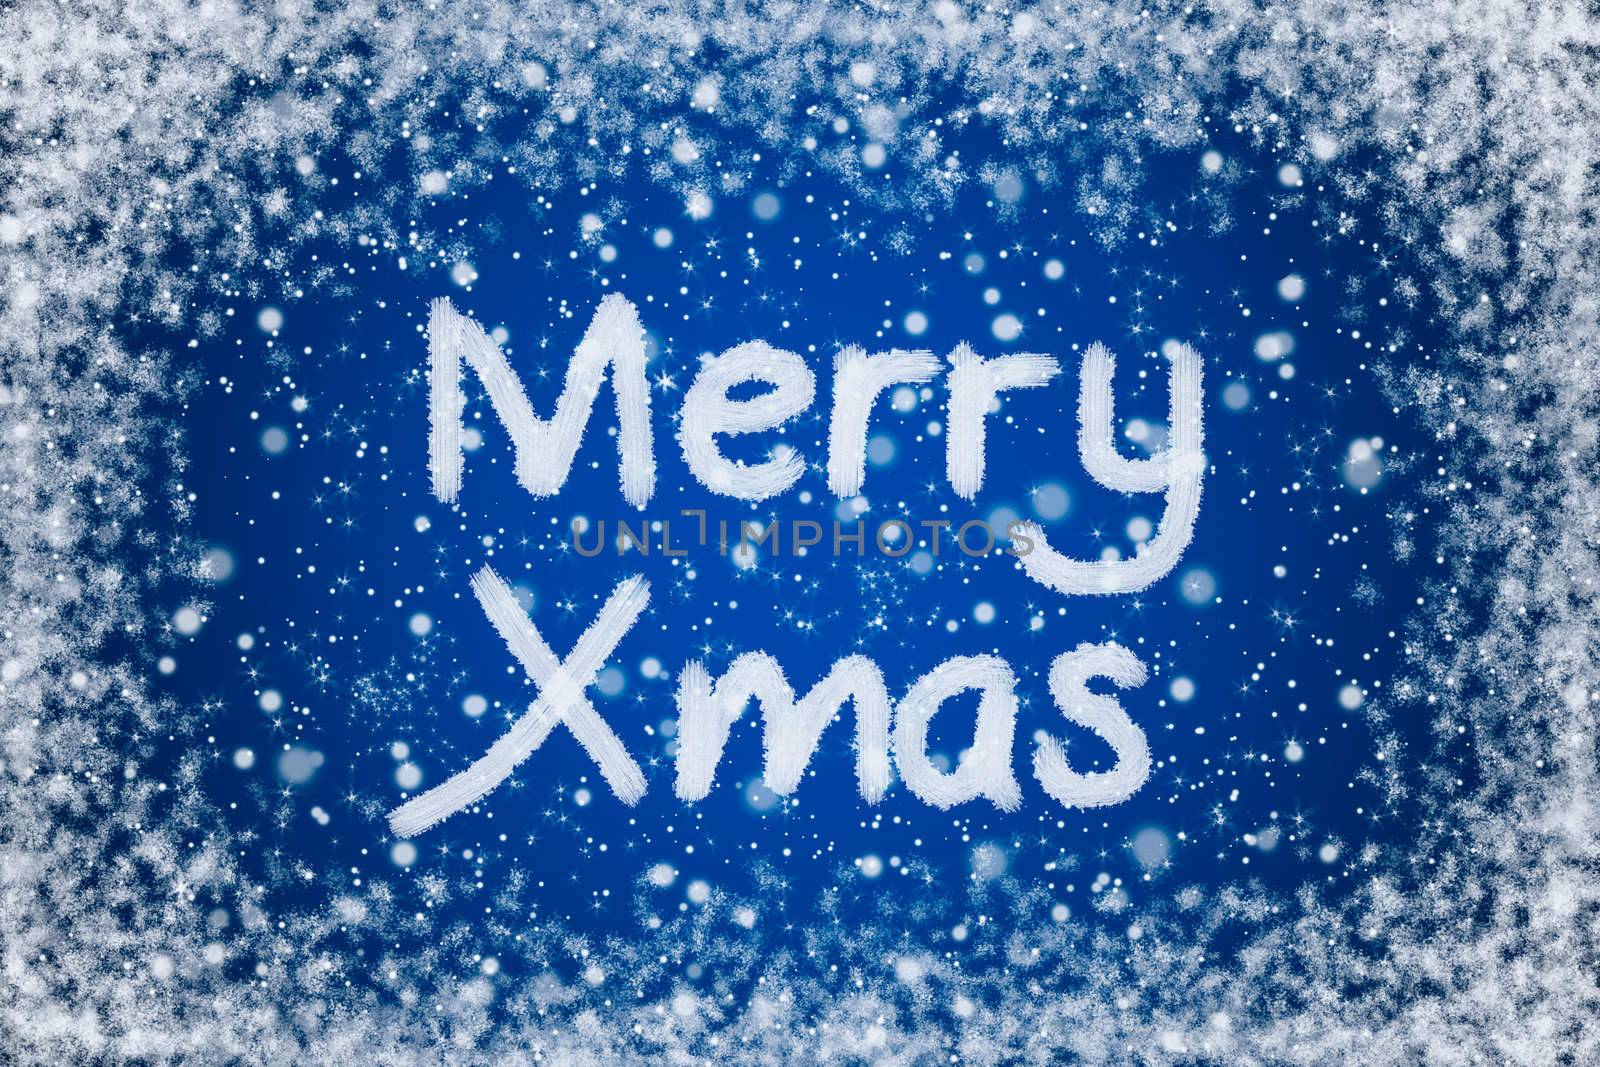 Christmas Blue Background with Merry Xmas Text in Snow Writing